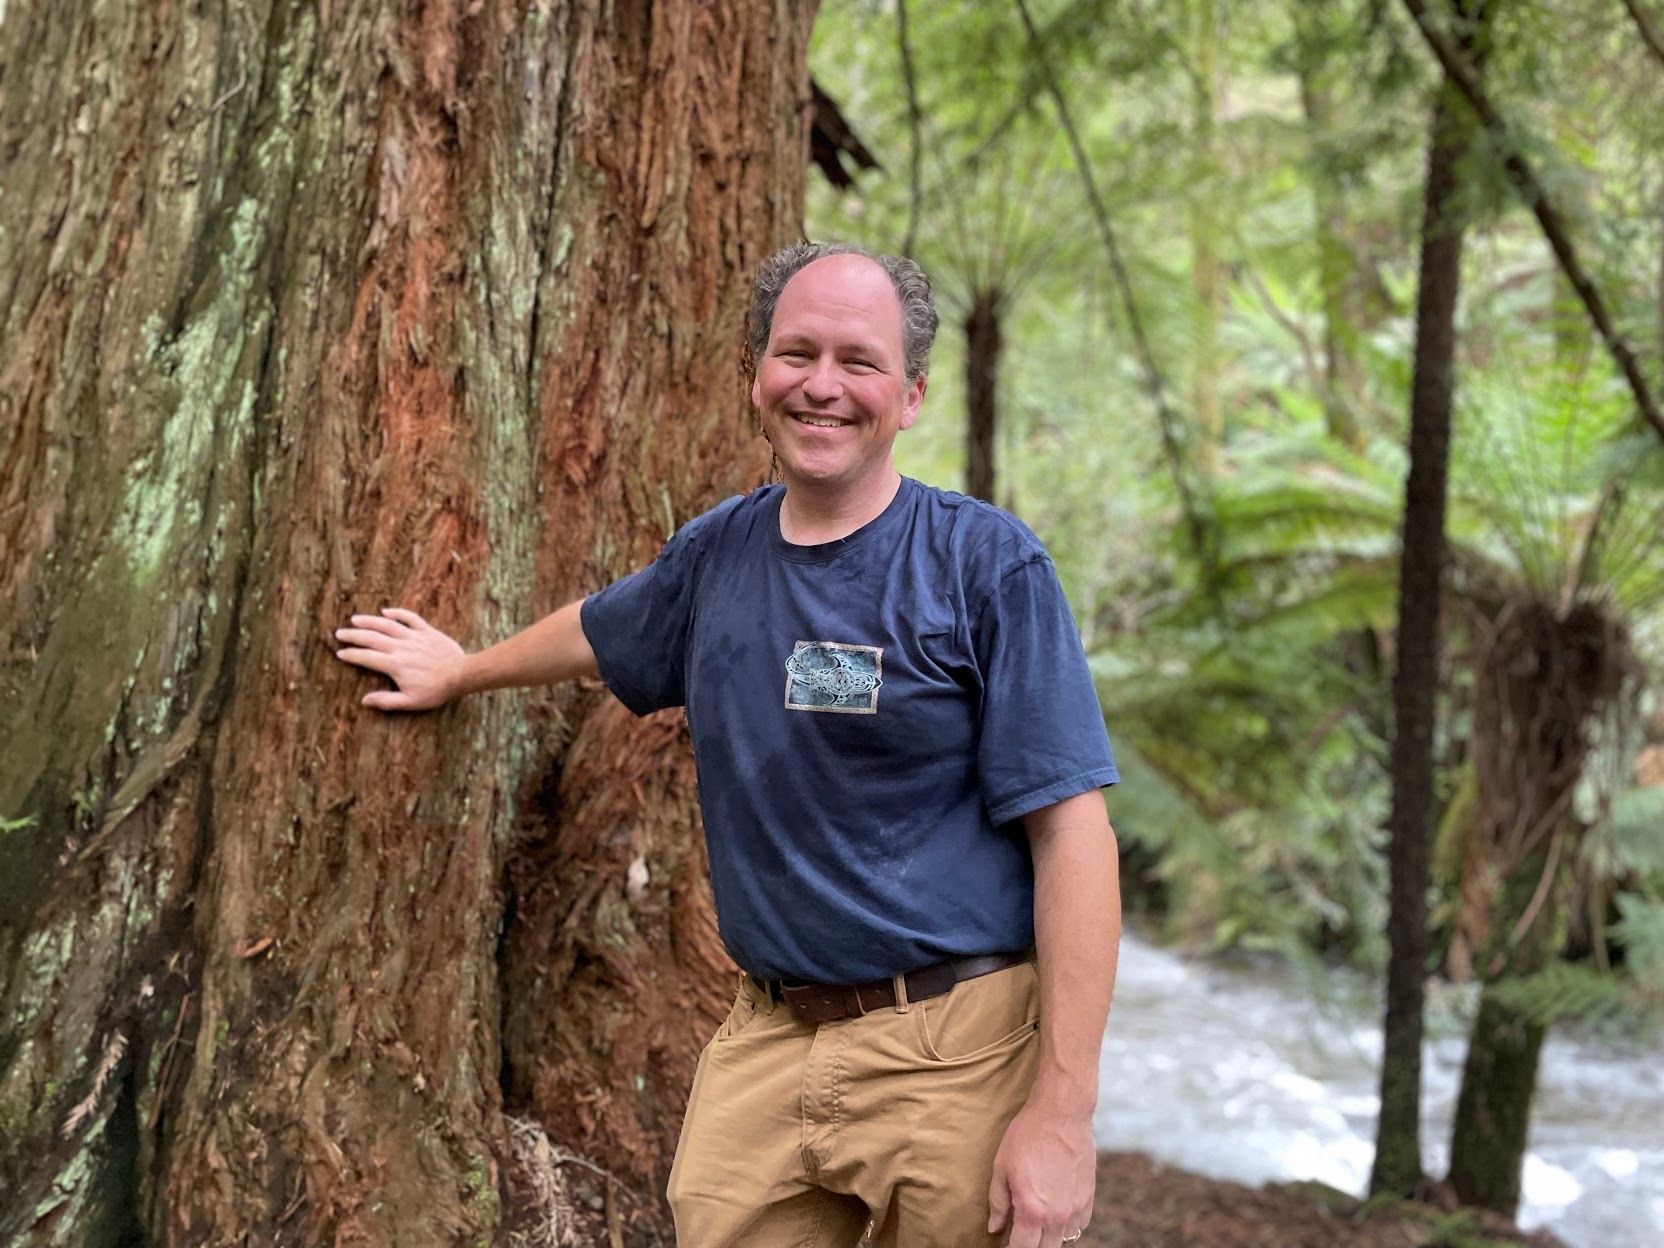 Bill Heller pictured posing in front of a tree